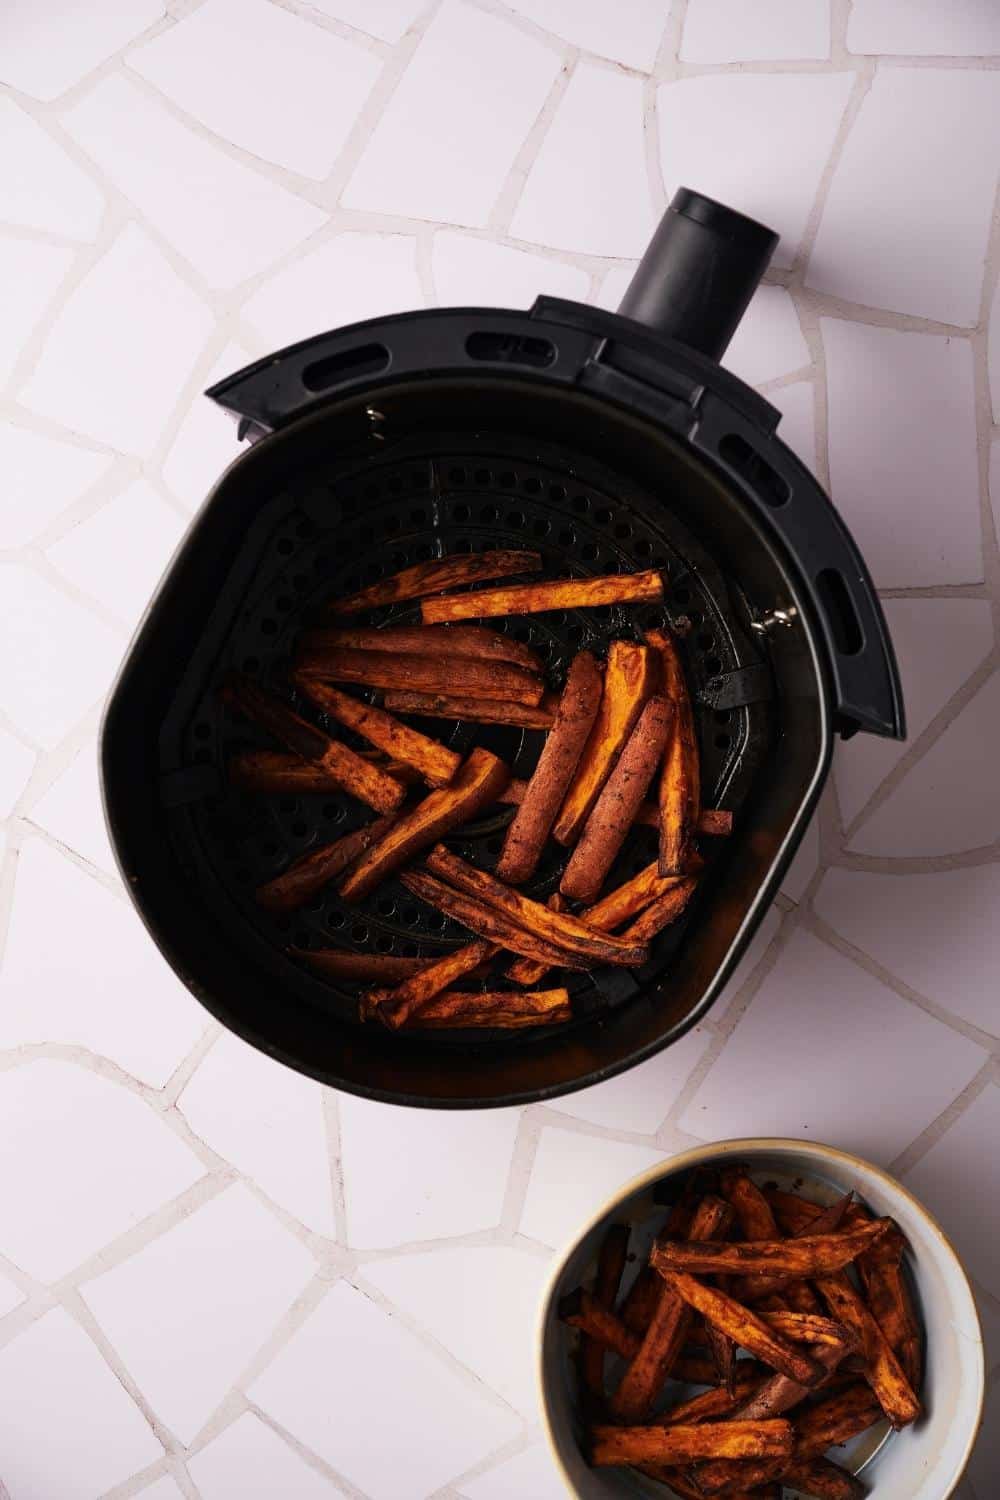 Cooked sweet potato fries in an air fryer basket resting on a countertop. The bottom right side is a small bowl of cooked sweet potato fries from the first batch.